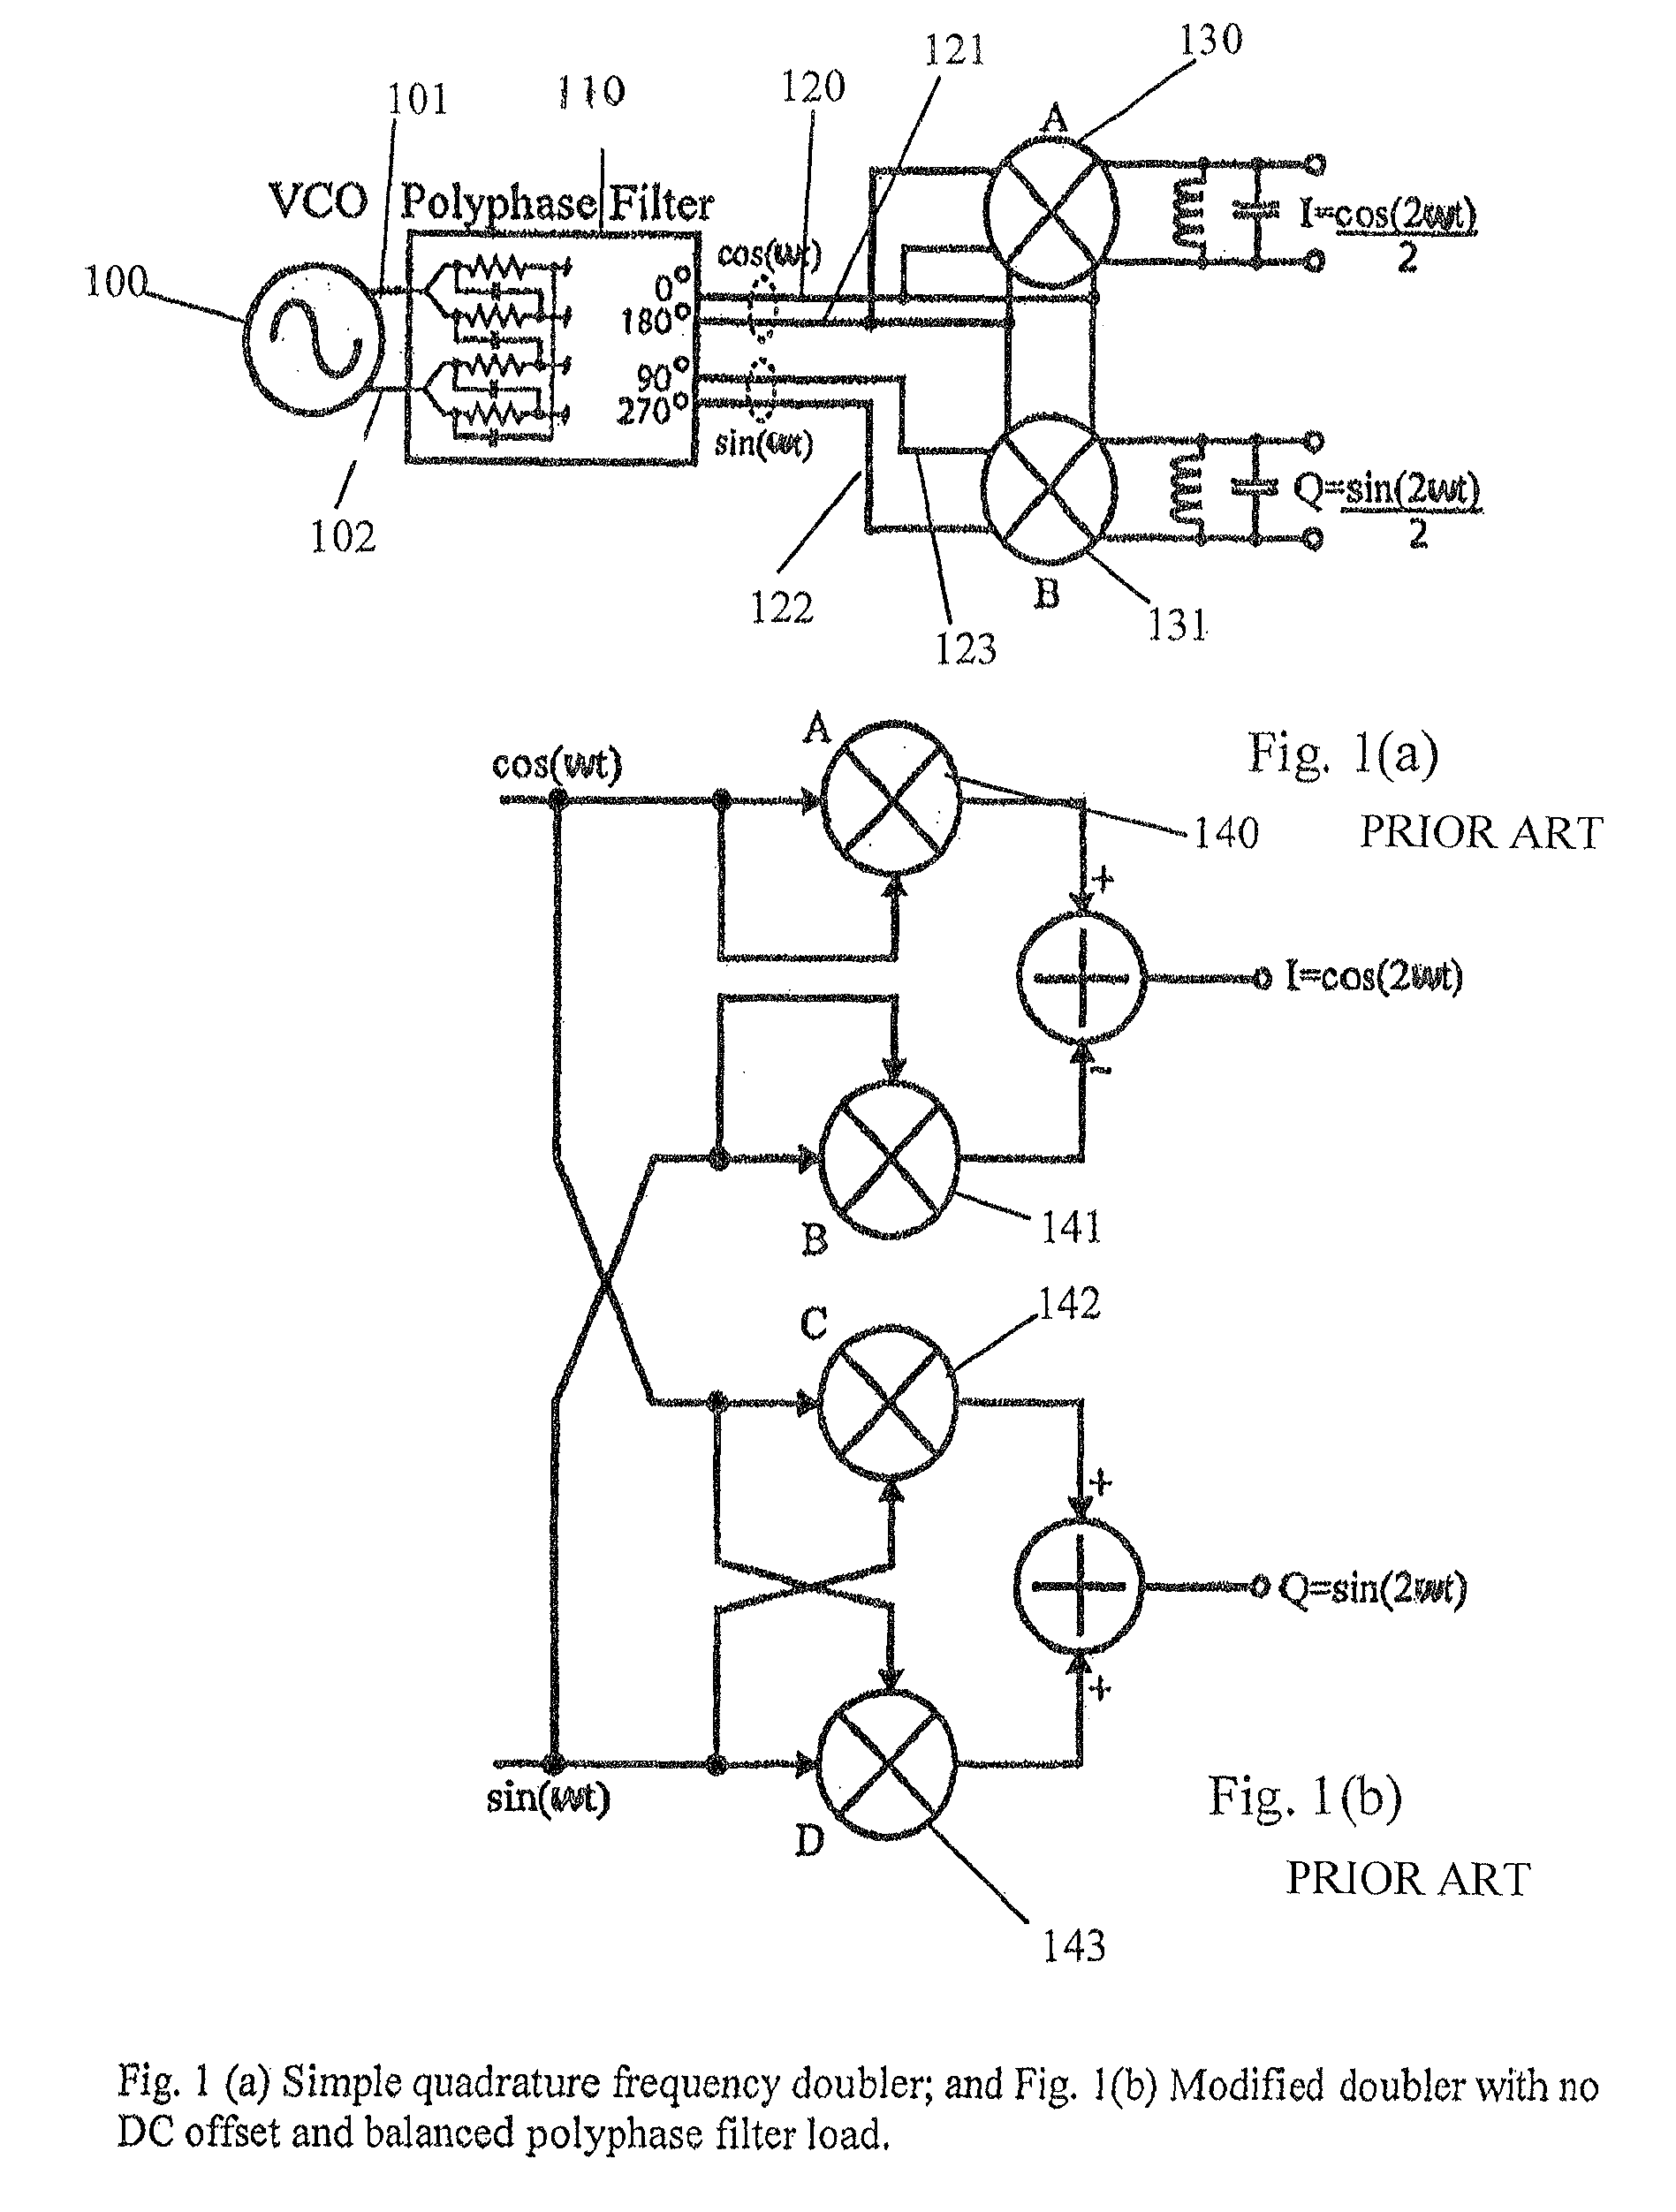 Quadrature frequency doubler with adjustable phase offset